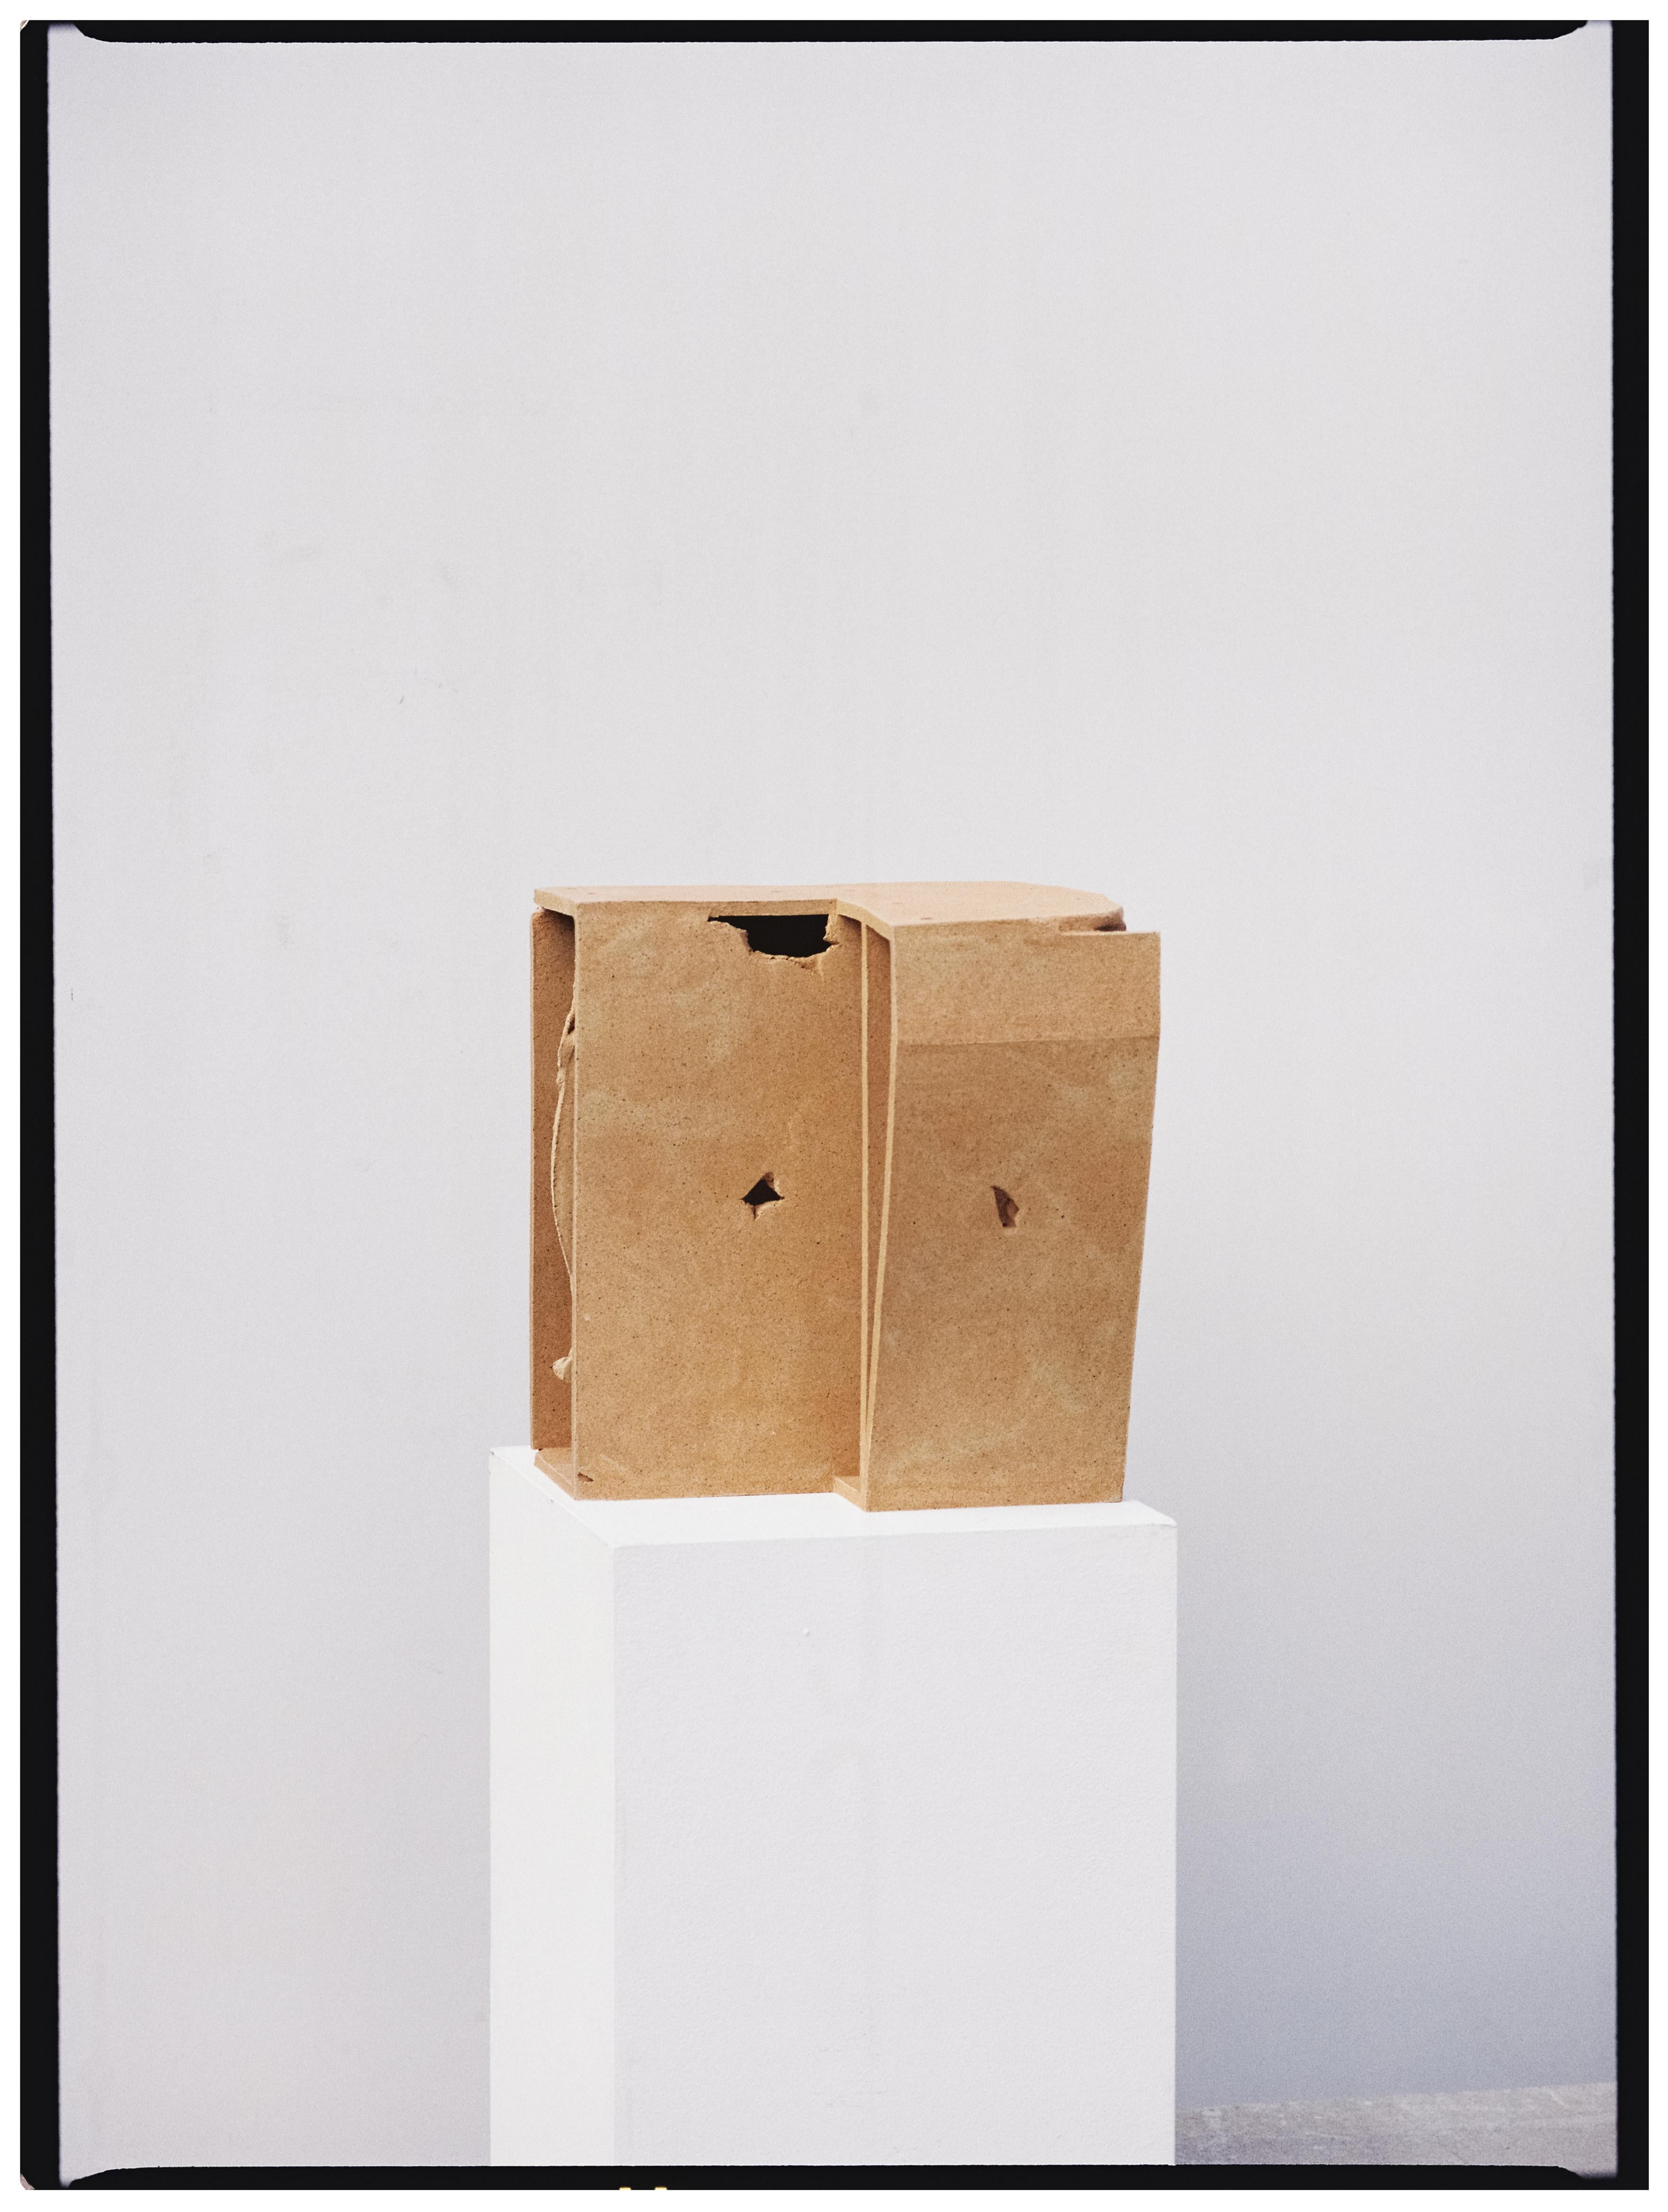 405 A3 Shelve by Turbina
Dimensions: W 40 x D 35 x H 45 cm
Materials: Fired Clay

The 405 project refers to the flow of movement, the path, the road. It is through the journey along the road that the human being (re)constructs the territory,